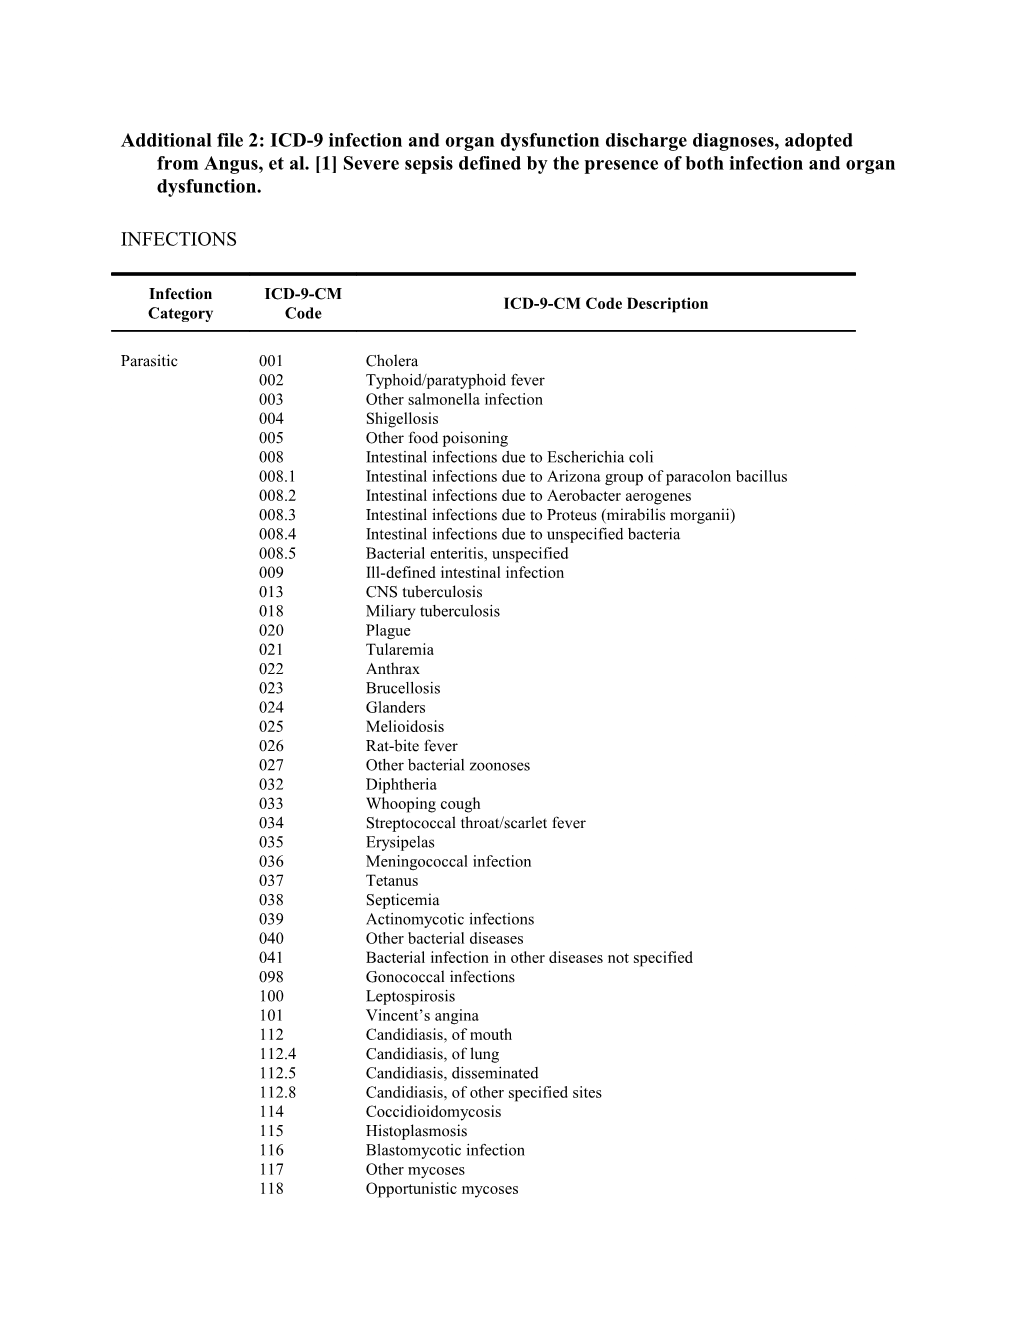 Additional File 2: ICD-9 Infection and Organ Dysfunction Discharge Diagnoses, Adopted From